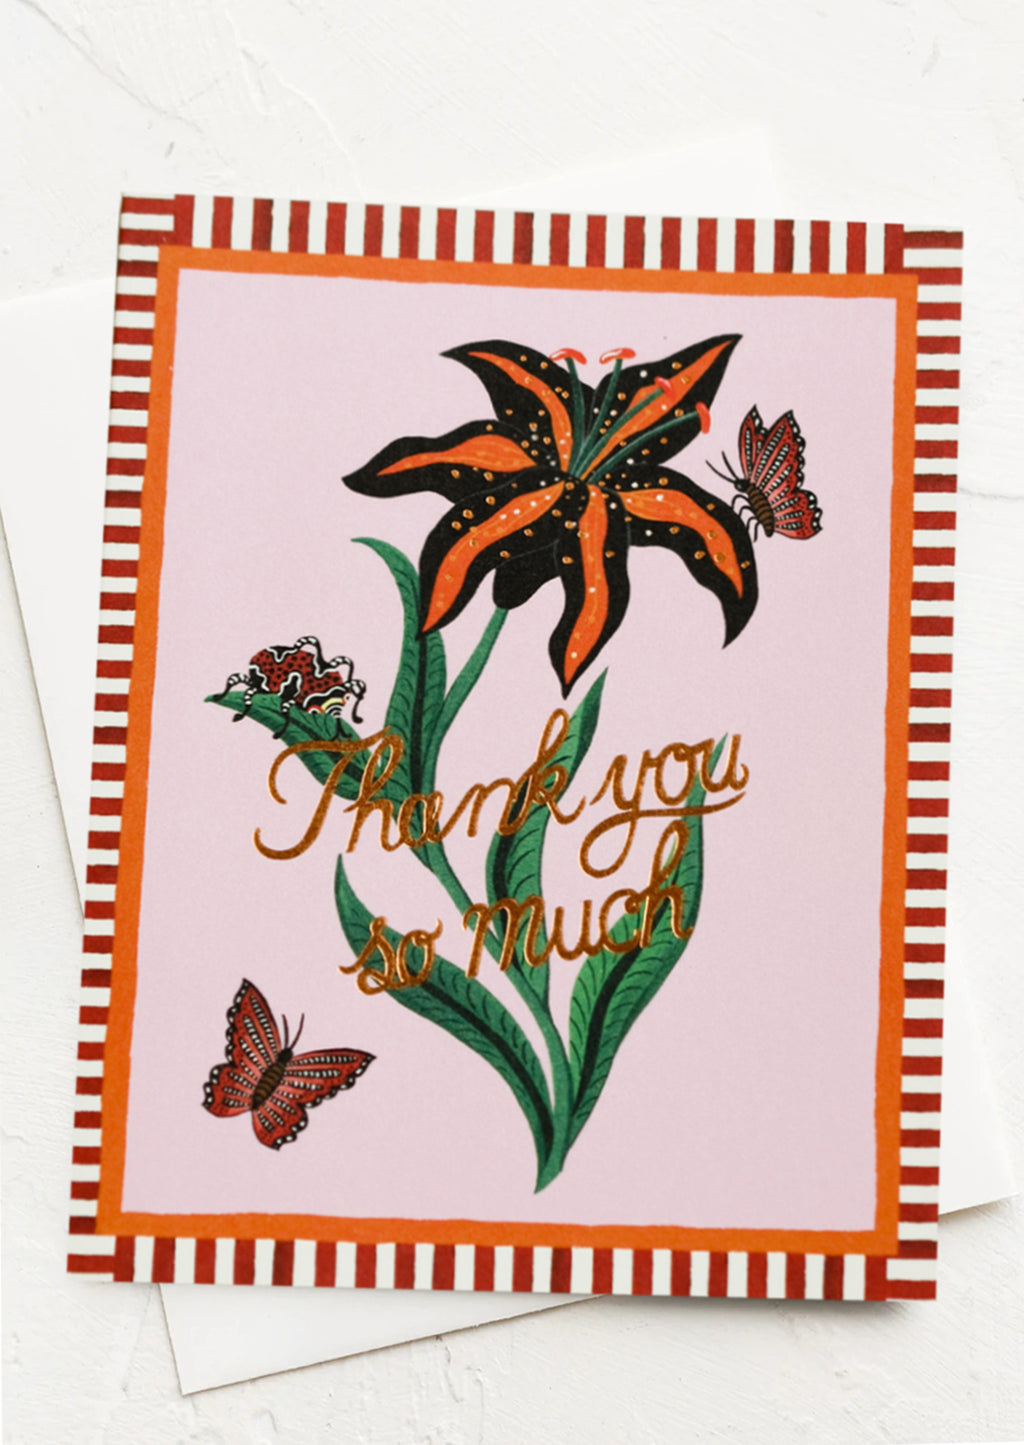 Single Card: A tiger lily printed card with striped border reading "Thank you so much".